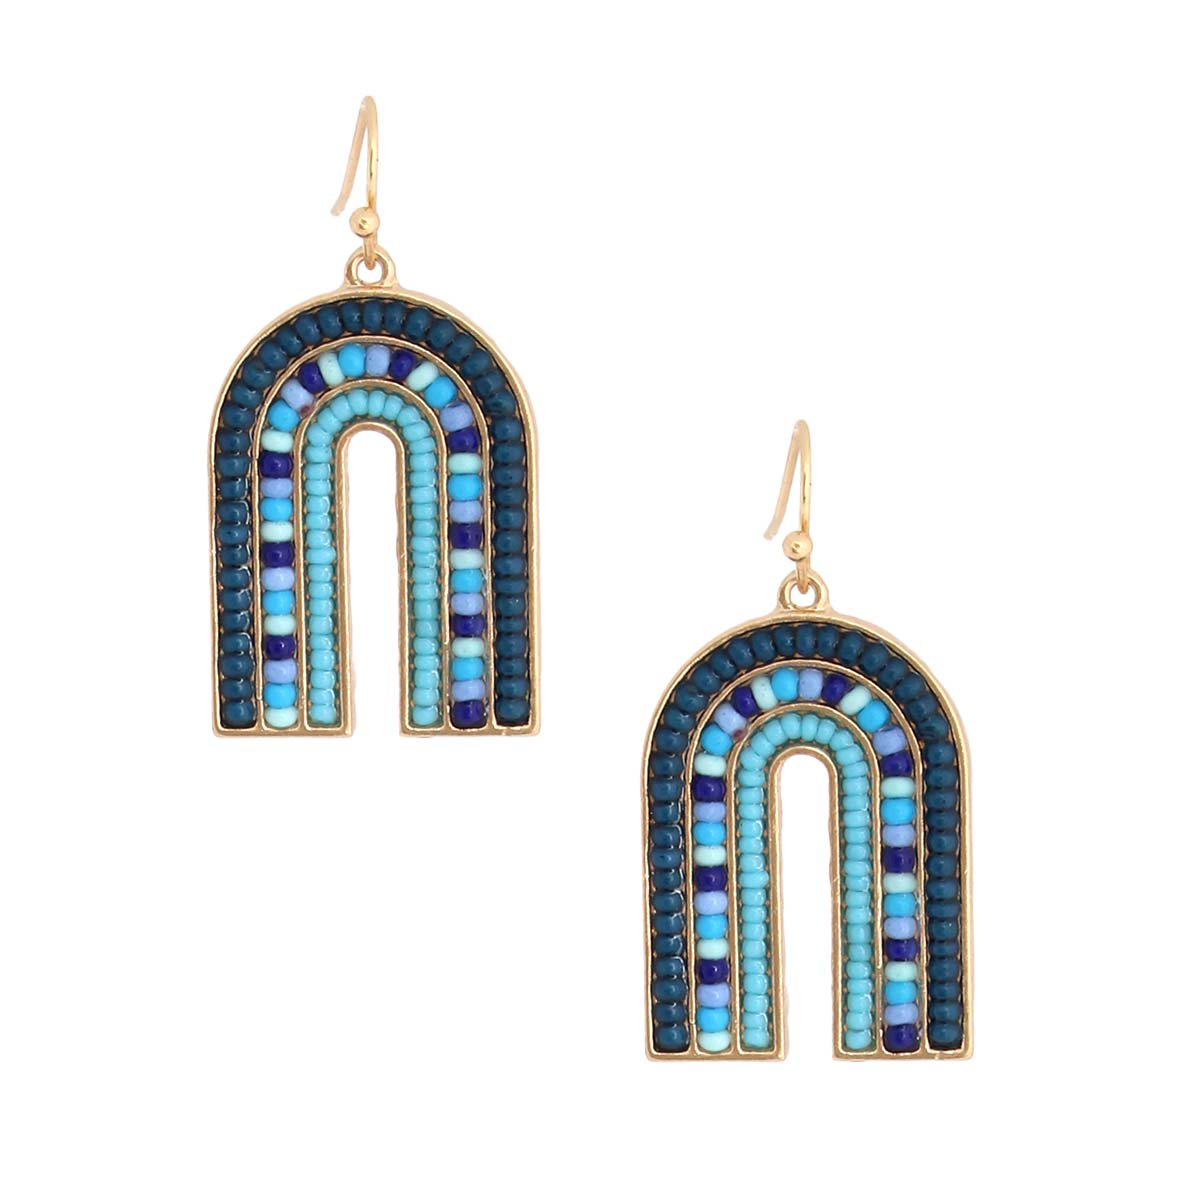 Arched Blue Bead Drop Earrings